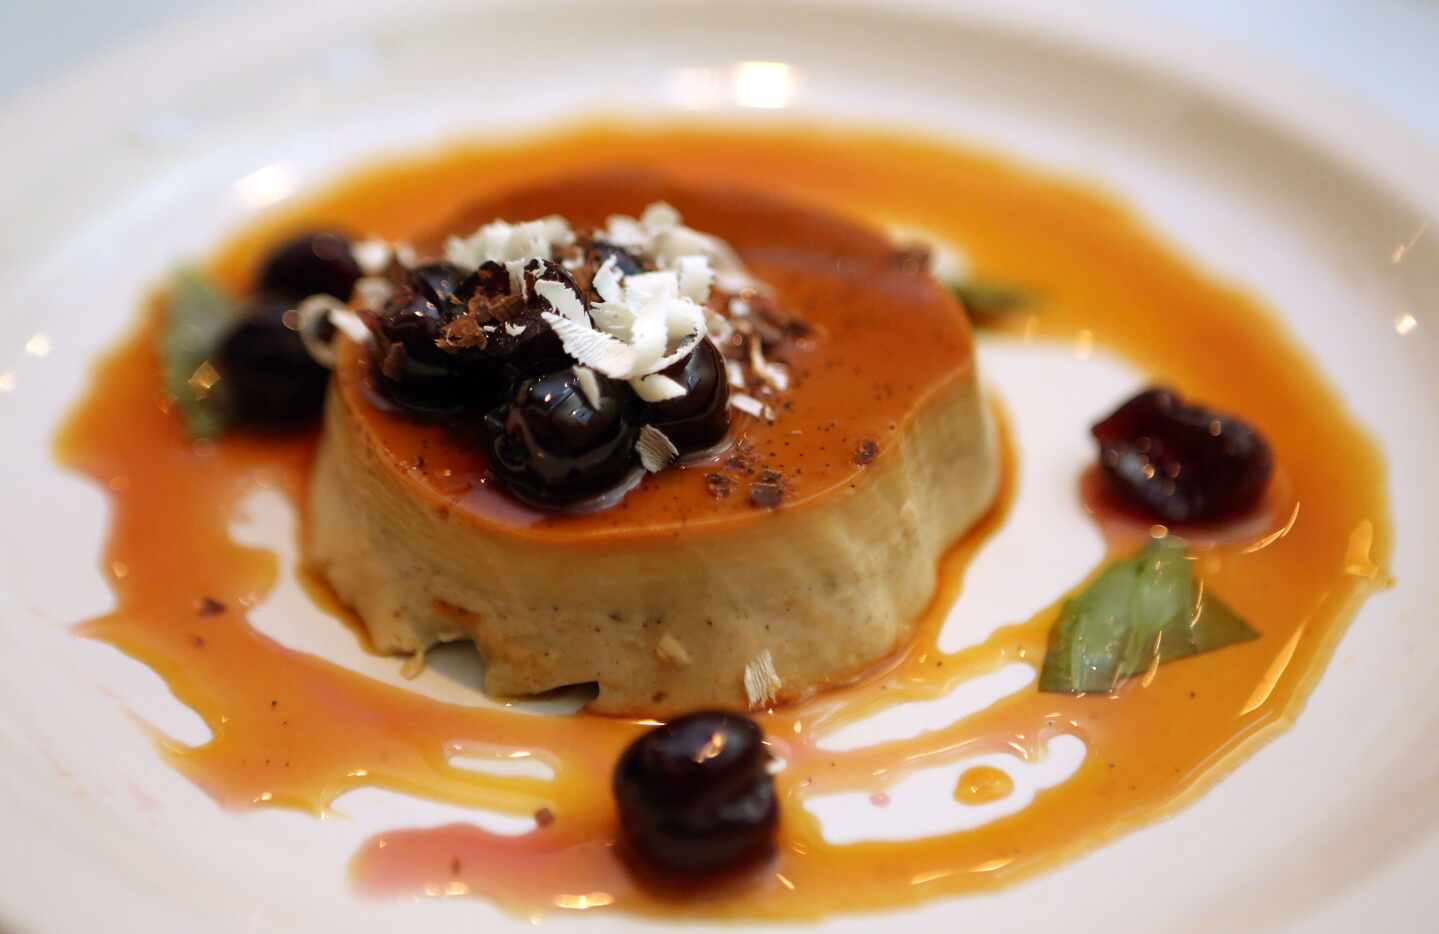 Mocha creme caramel is shown at Urbano Cafe in Dallas, Texas, Wednesday, February 11, 2015.